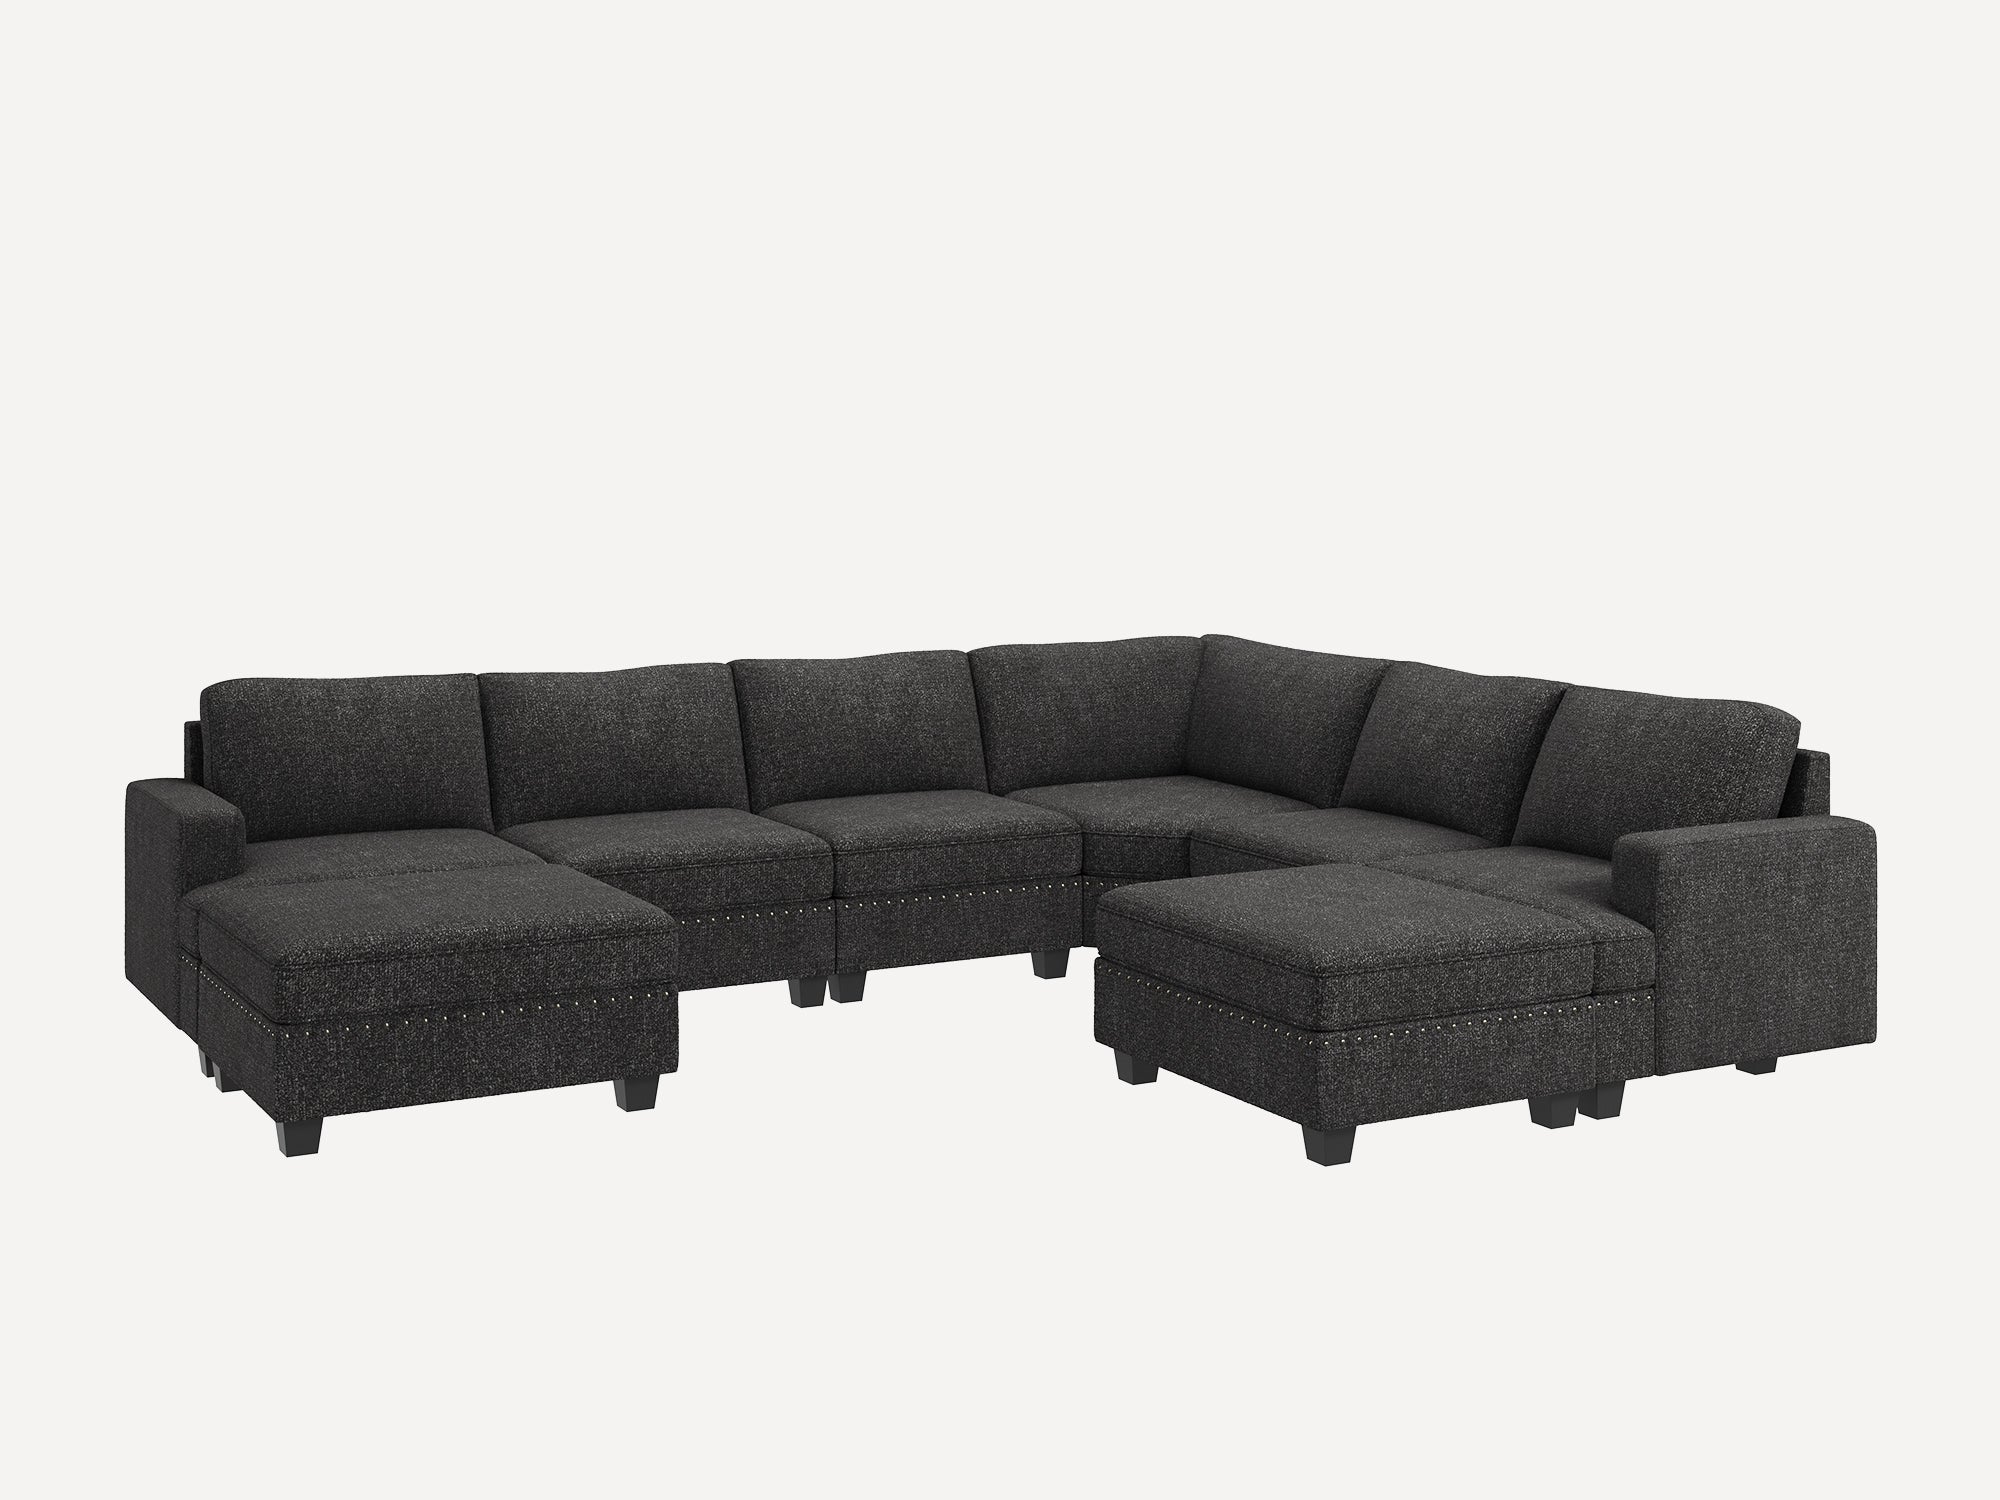 HONBAY 6-Seat Corner Modular Sofa Oversized Sectional Sofa Couch with Two Storage Reversible Ottoman #Color_Dark Grey